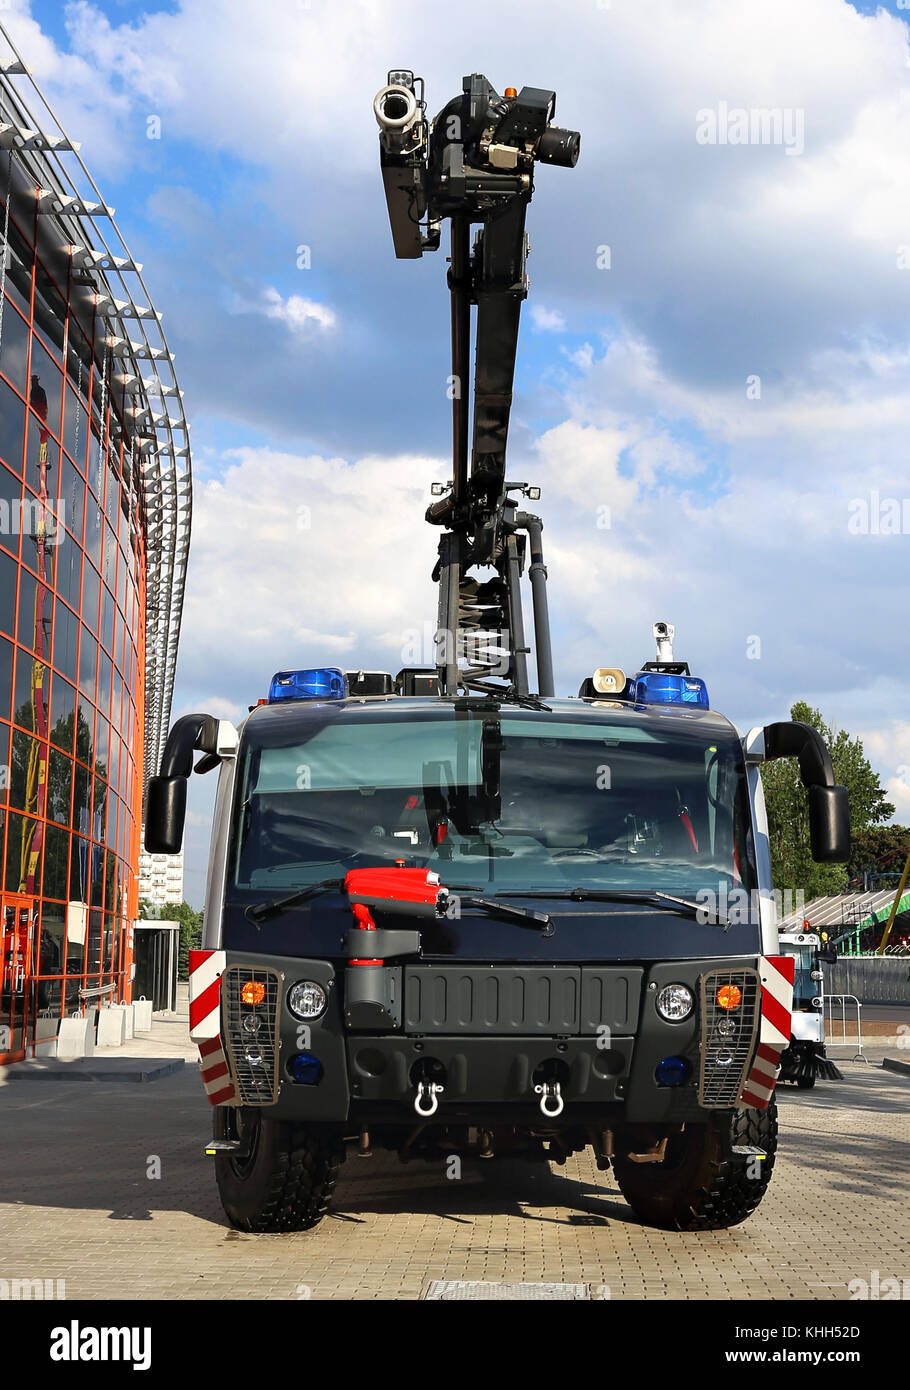 Emergency vehicle based on car chassis equipped with fire and other technical equipment Stock Photo